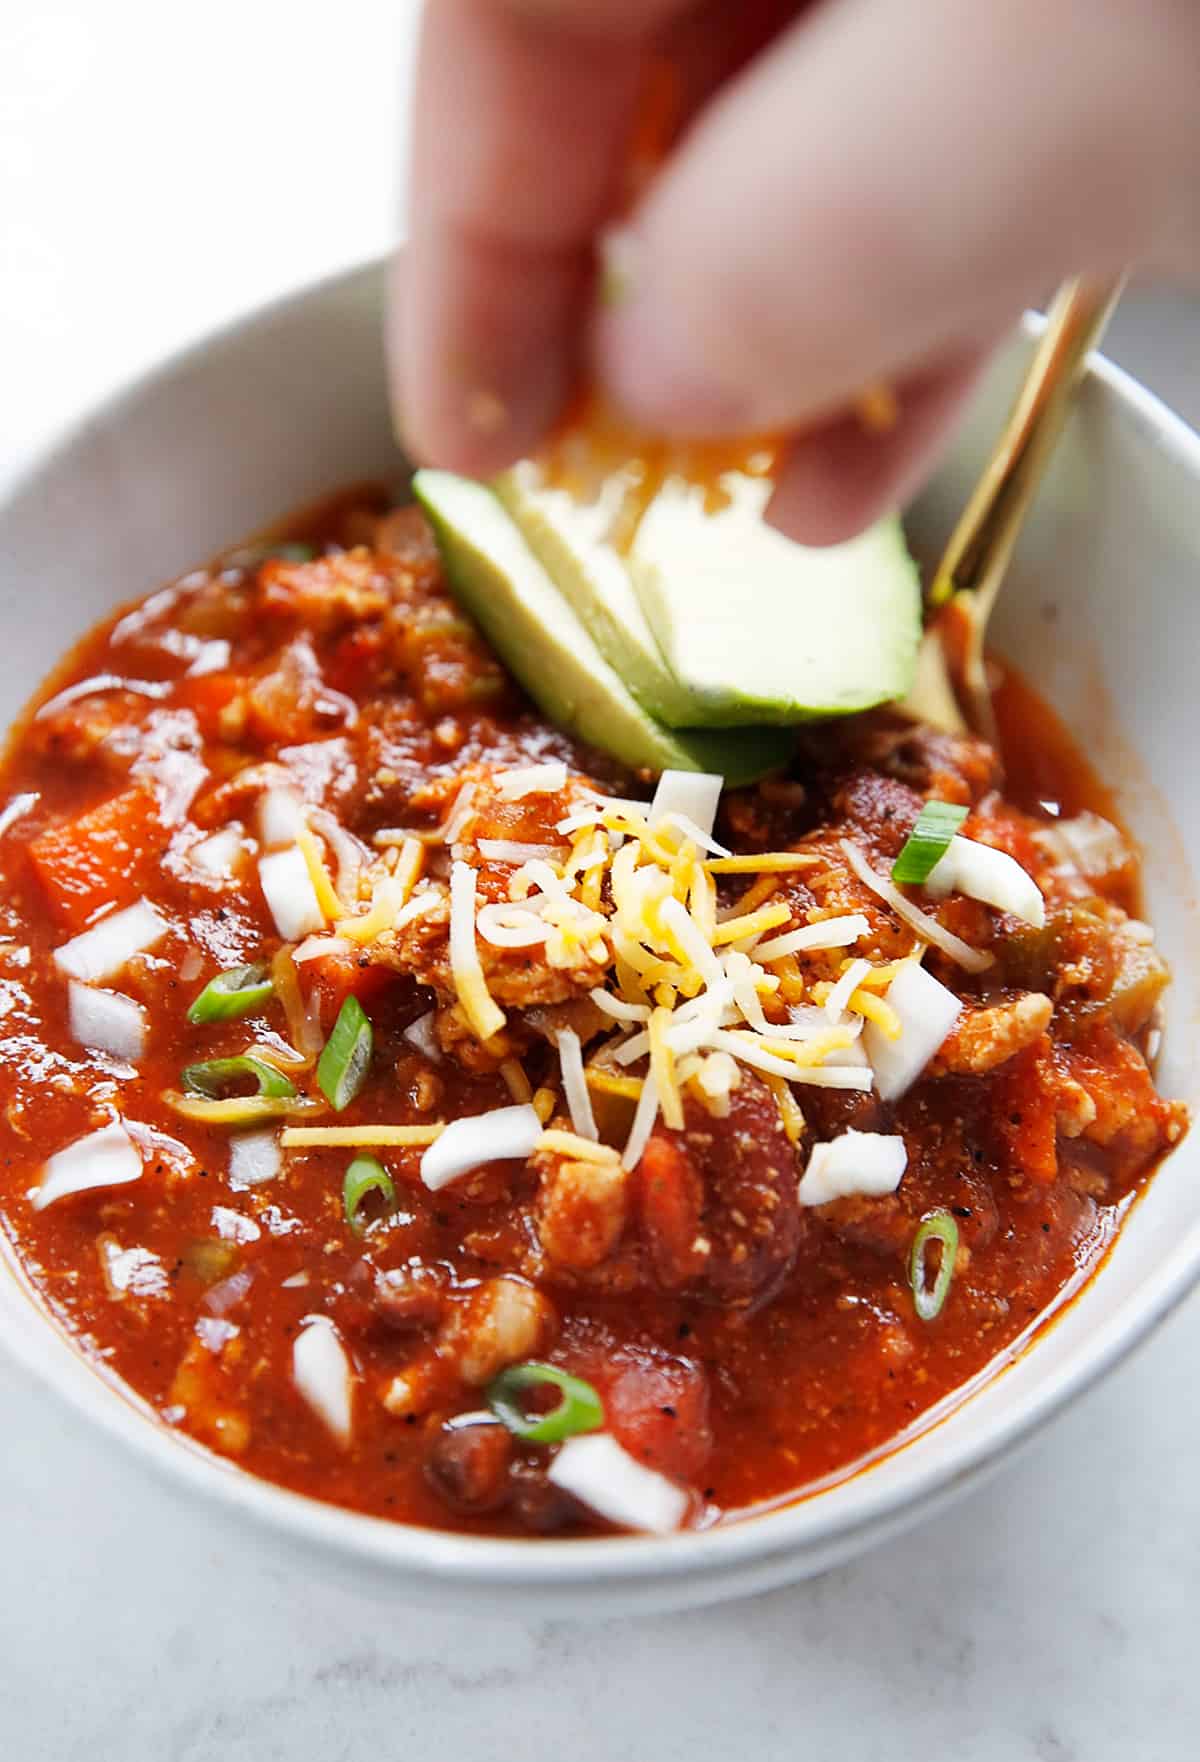 A hand sprinkling cheese on turkey chili in a bowl.